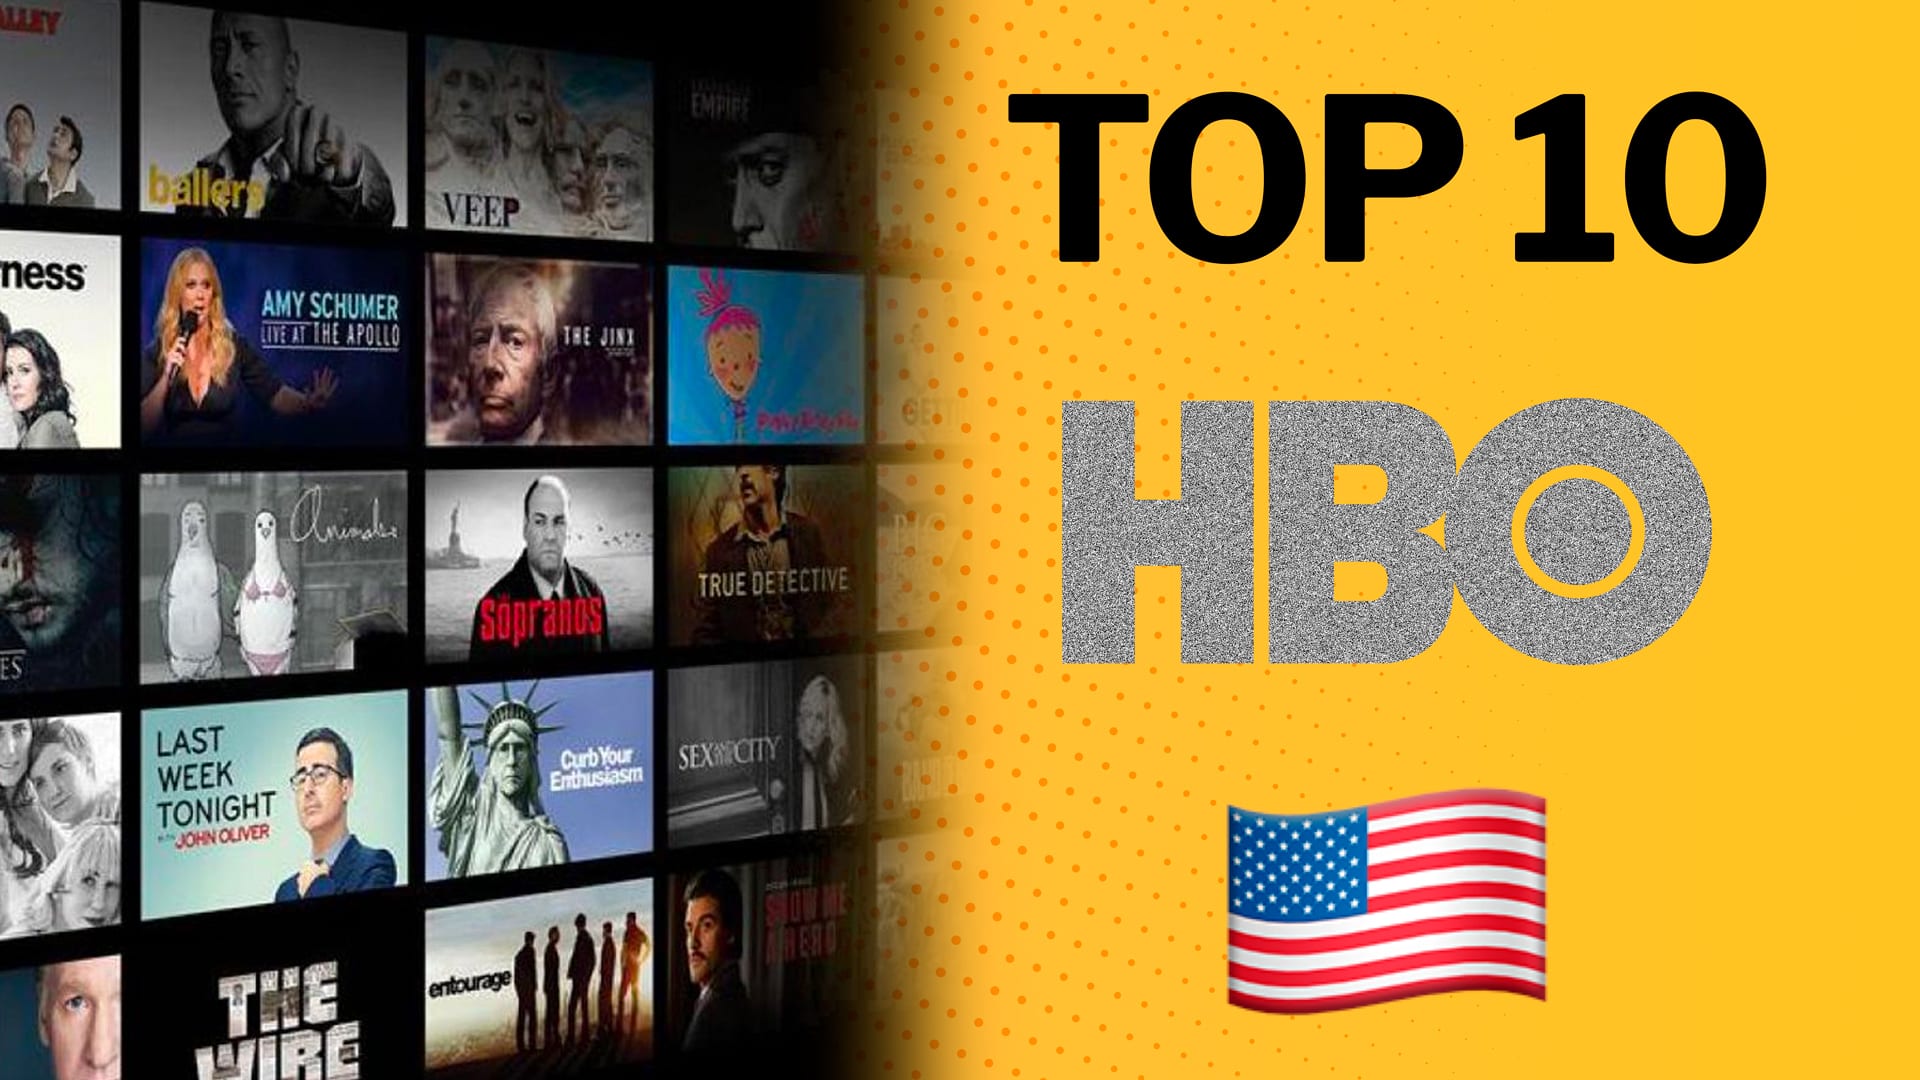 HBO ranking in the United States: these are the most popular films of the moment